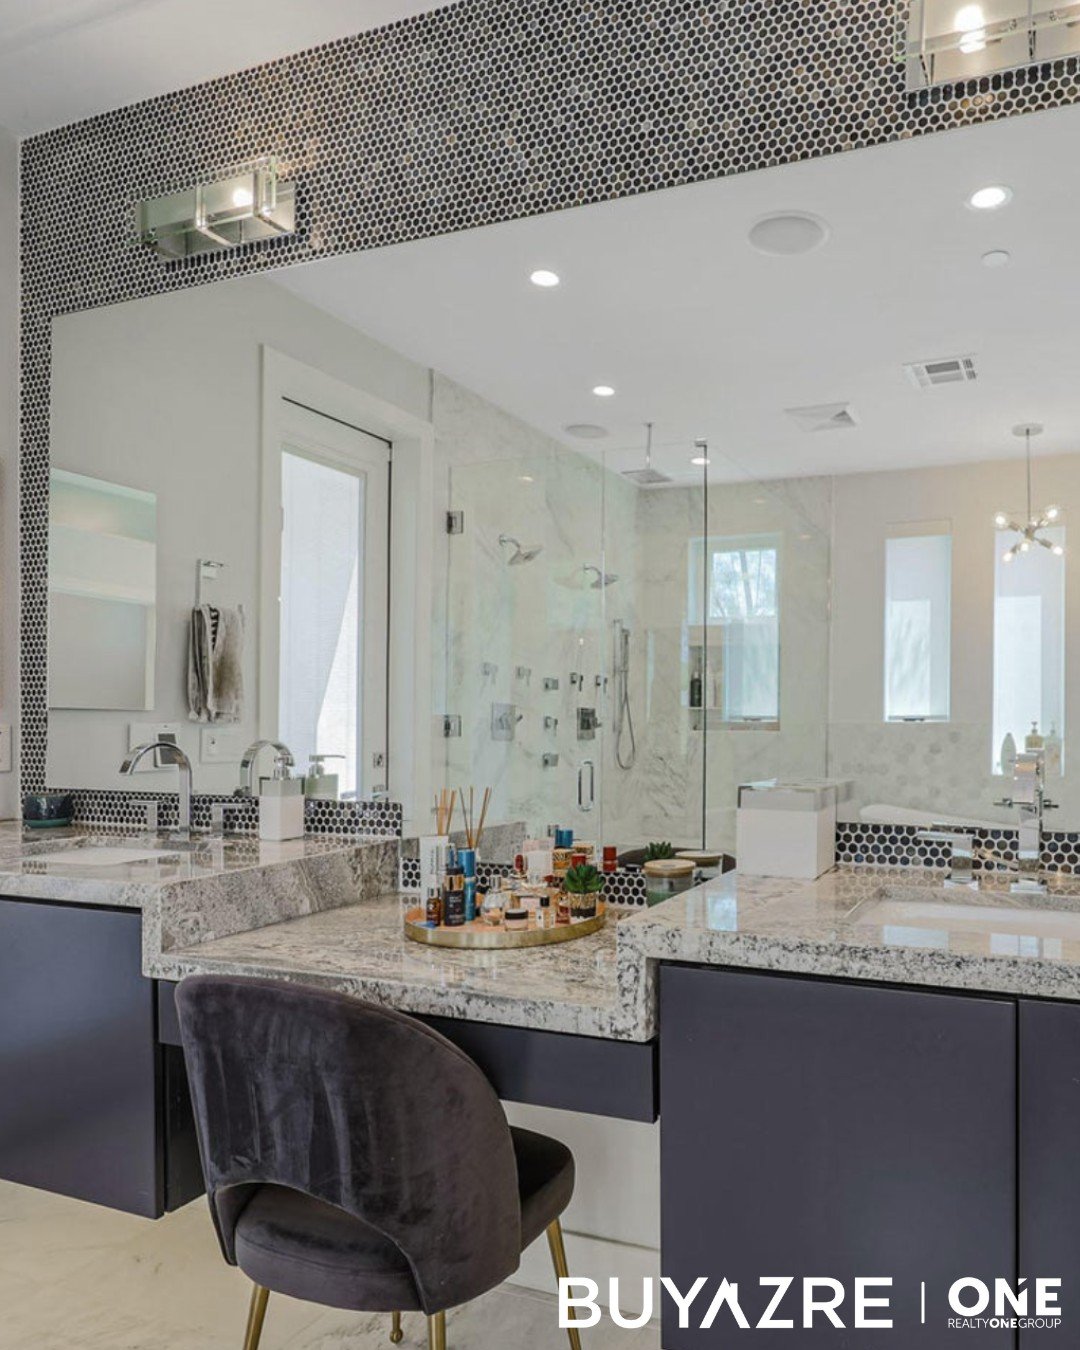 Can you imagine getting ready in here? 😍

Check out this sexy double vanity with a makeup station in between in this master bathroom! ✨ 

#bathroom #realestate #sleek